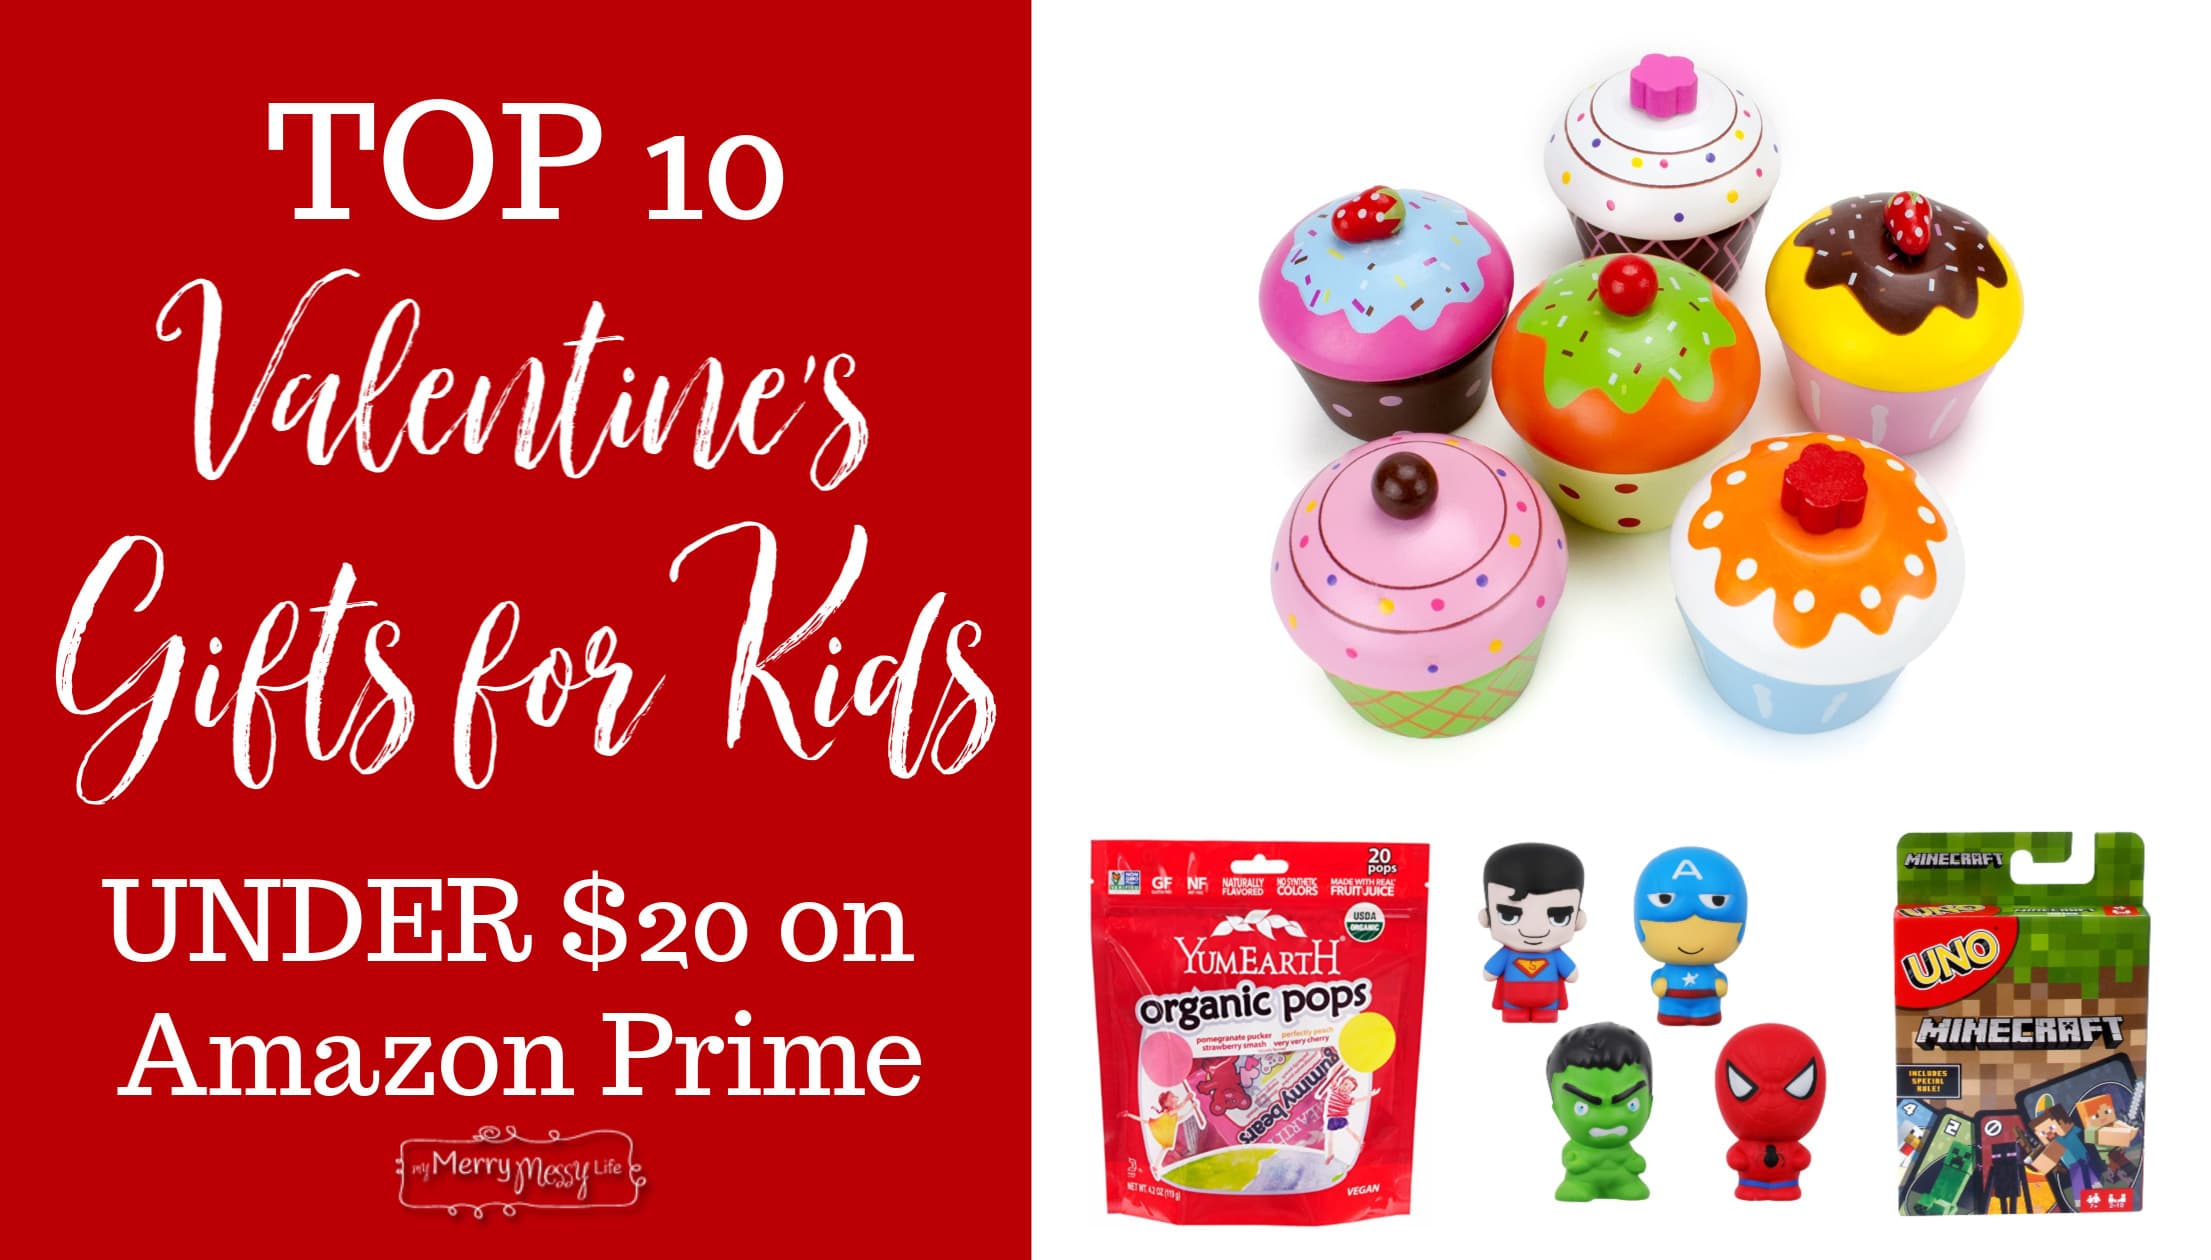 Top 10 Valentine's Day Gifts for Kids Under $20 on Amazon Prime